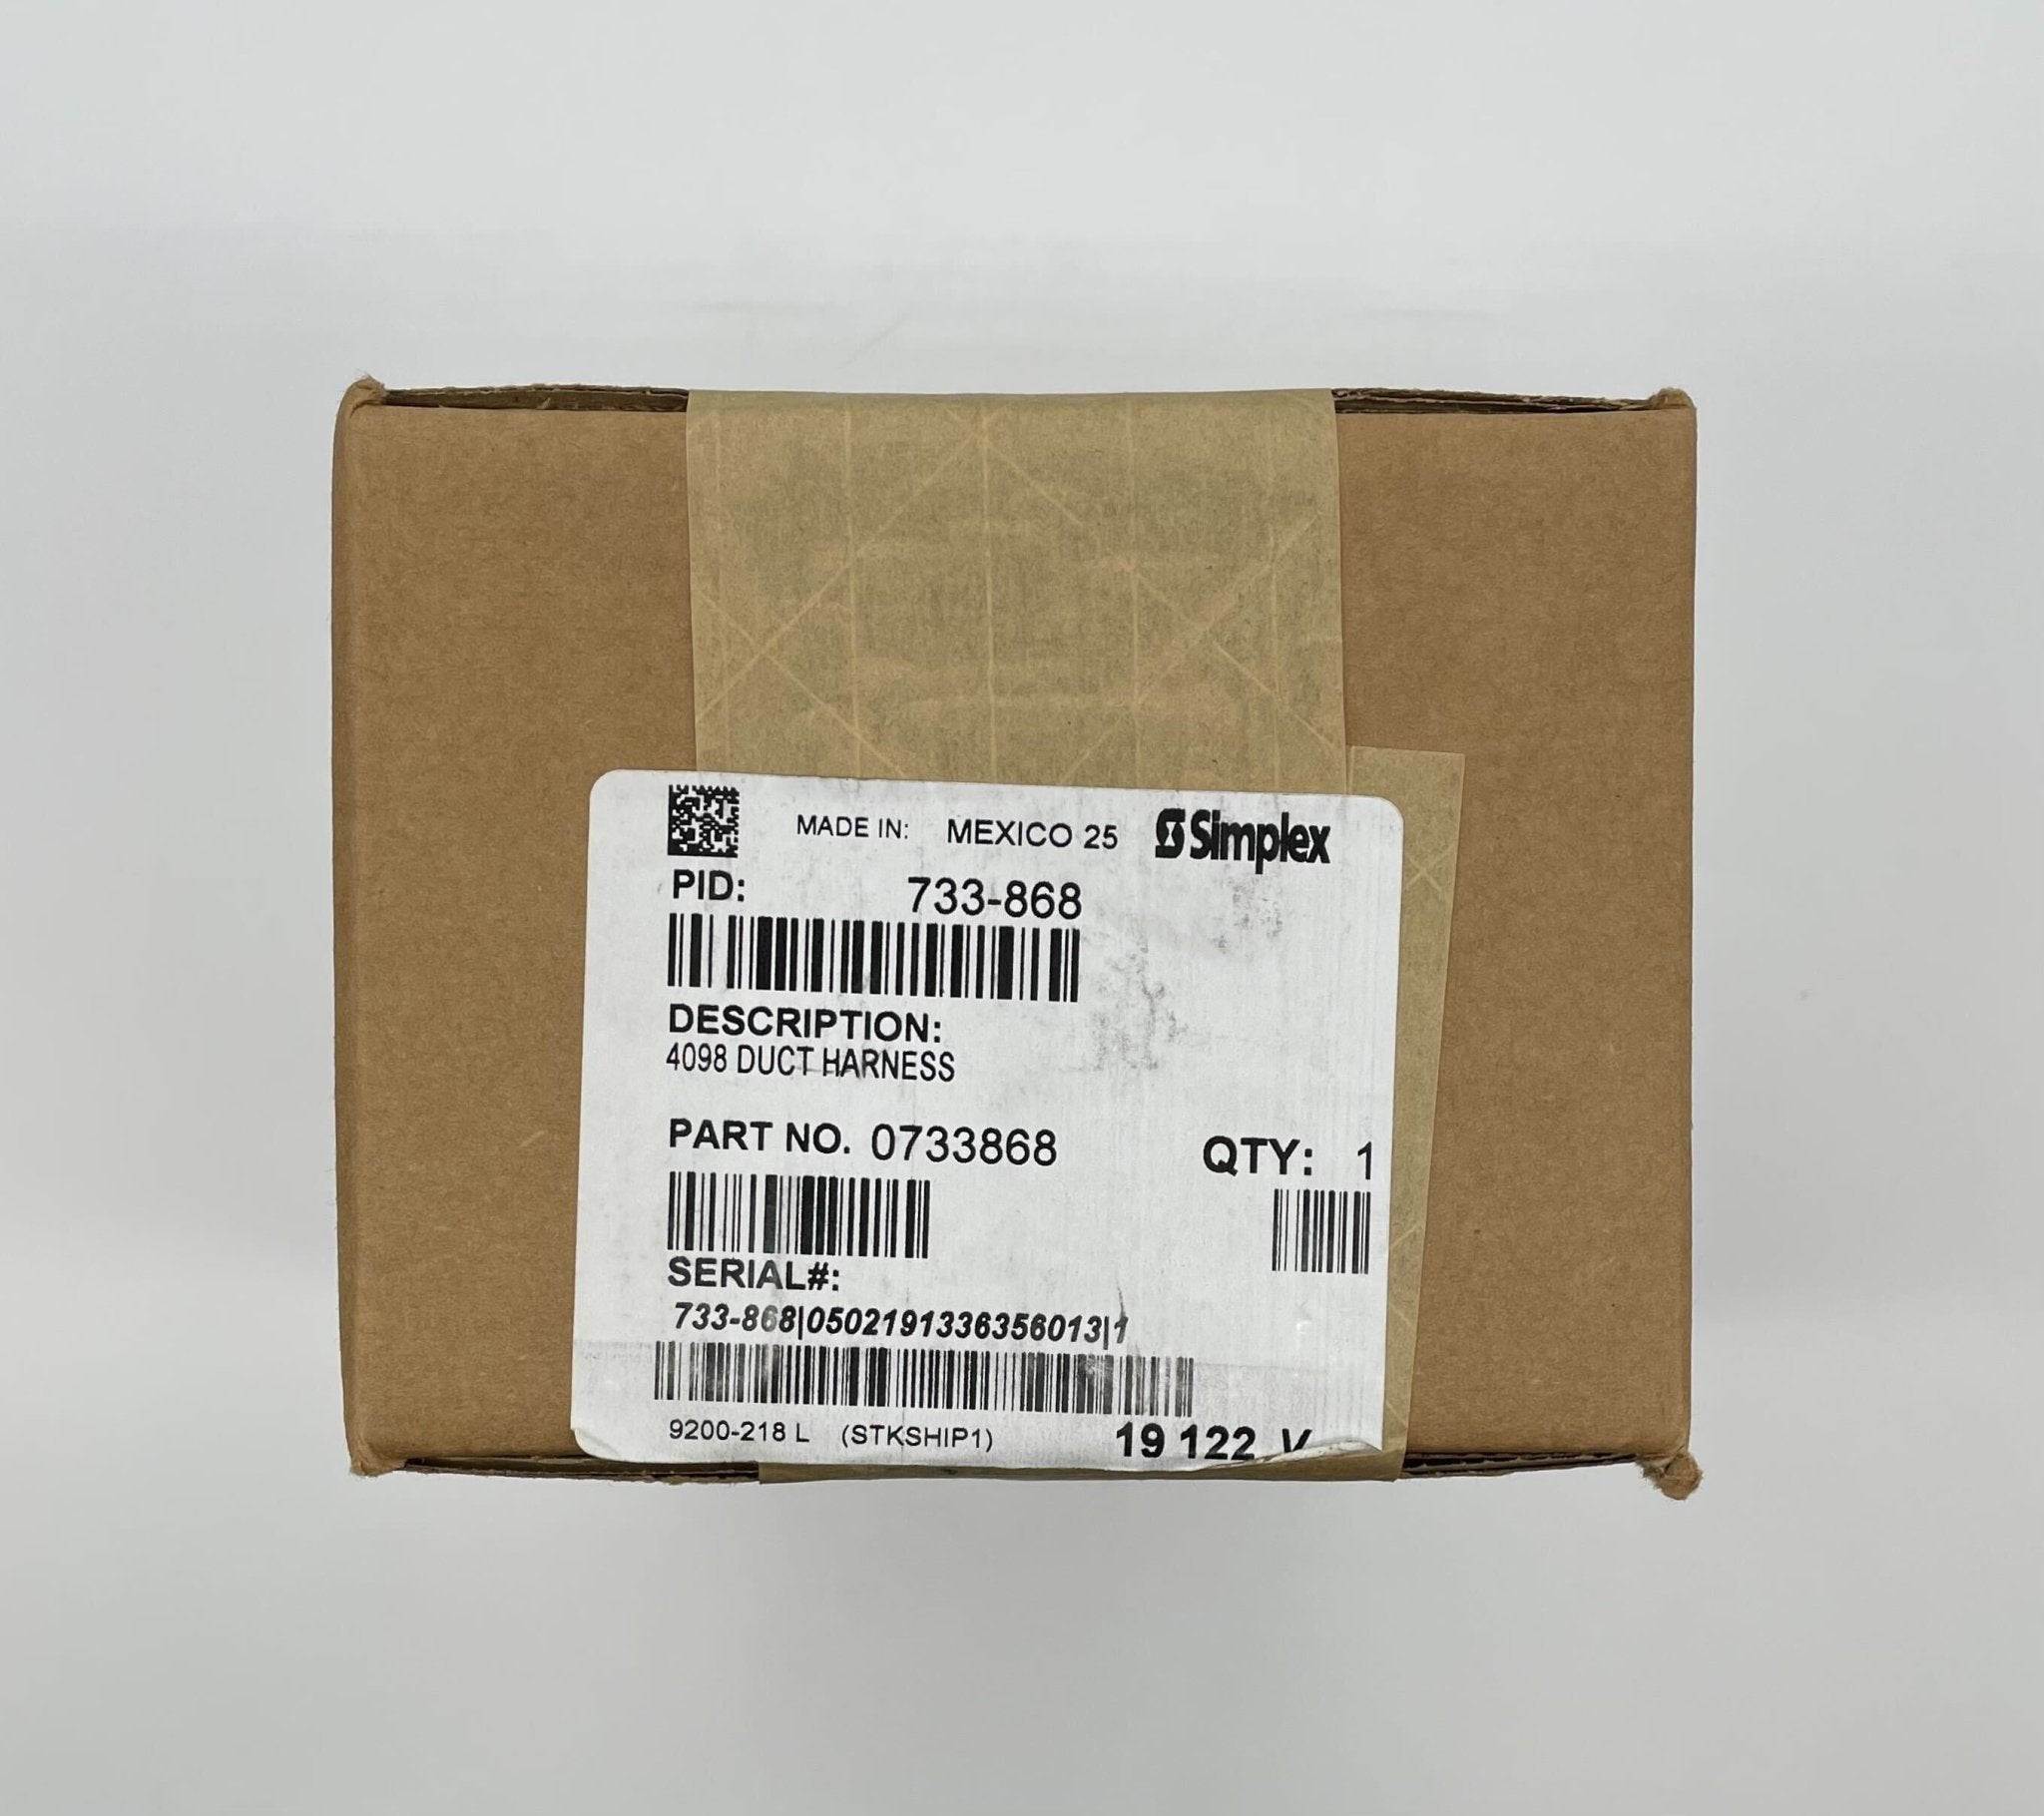 Simplex 733-868 Duct Harness - The Fire Alarm Supplier